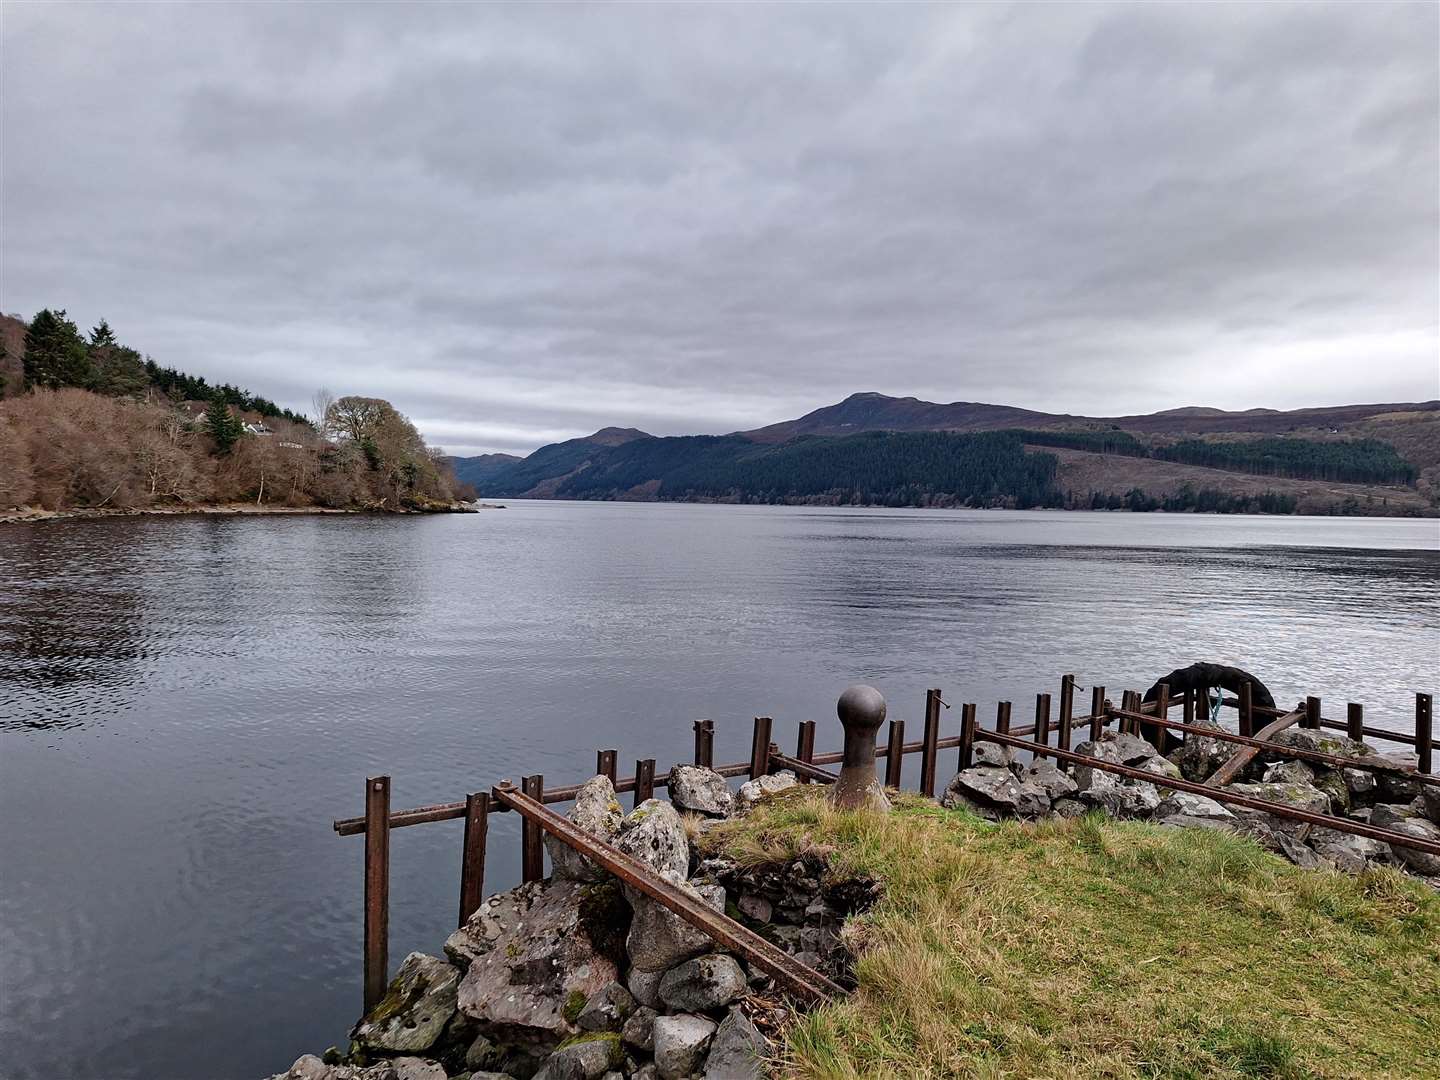 Looking across Loch Ness from the old pier at Inverfarigaig to Meall Fuar-mhonaidh.